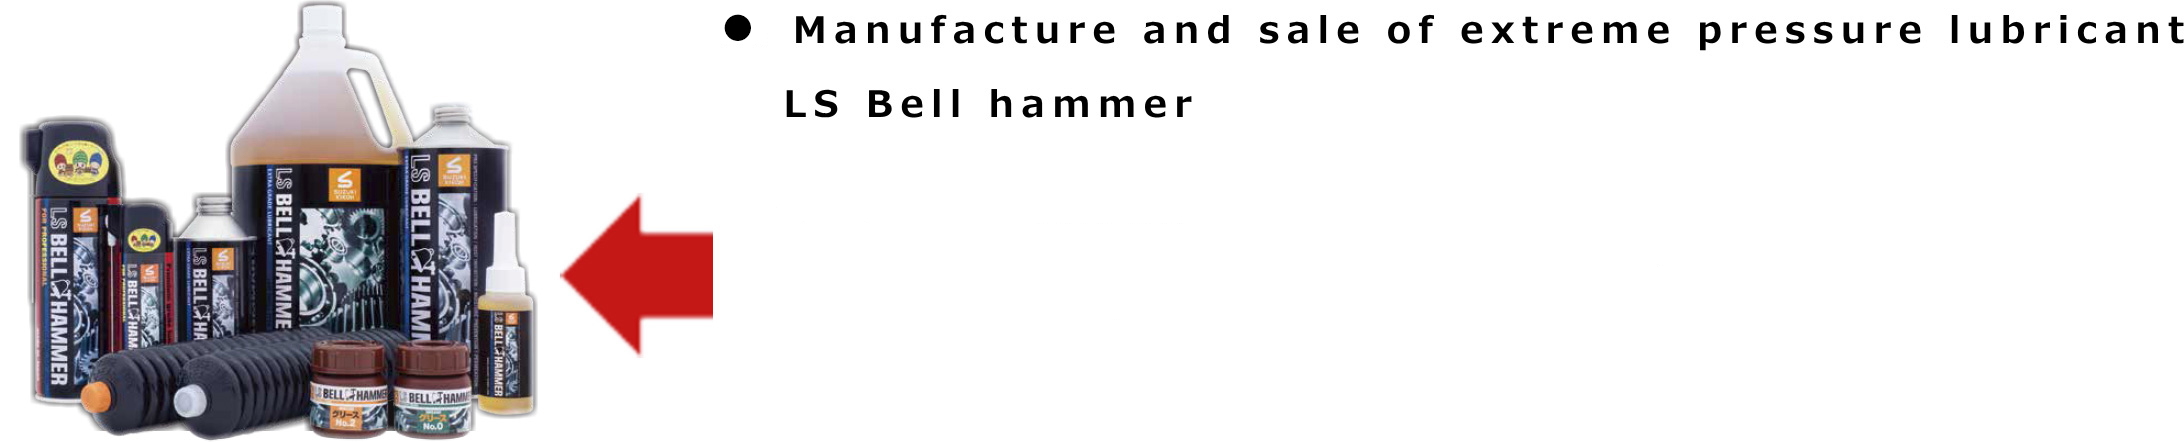 Manufactures and sale of extreme pressure lubricant LS Bell hammer